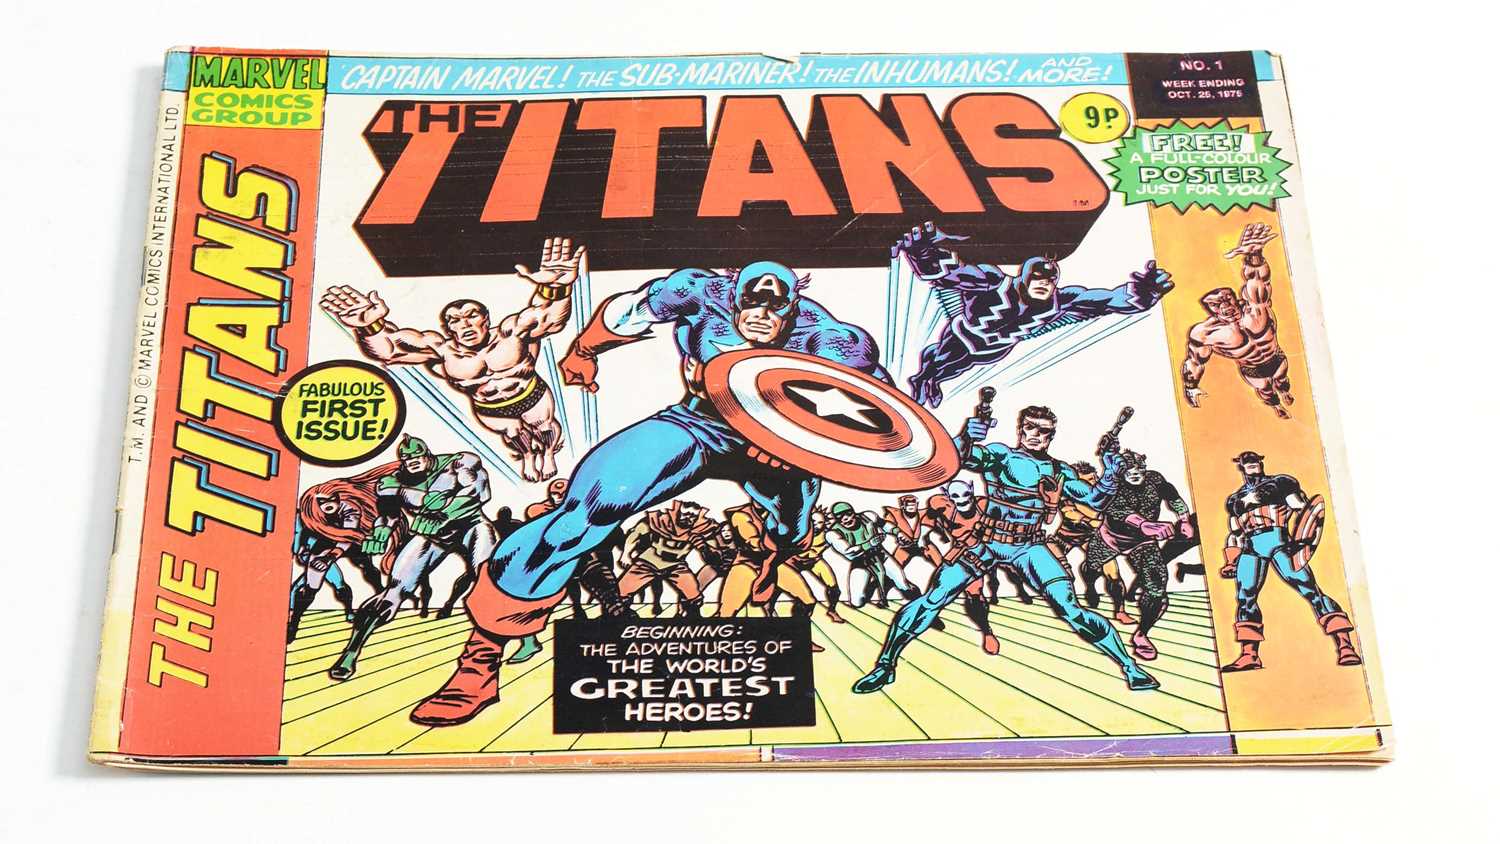 The Titans by British Marvel comics - Image 6 of 13